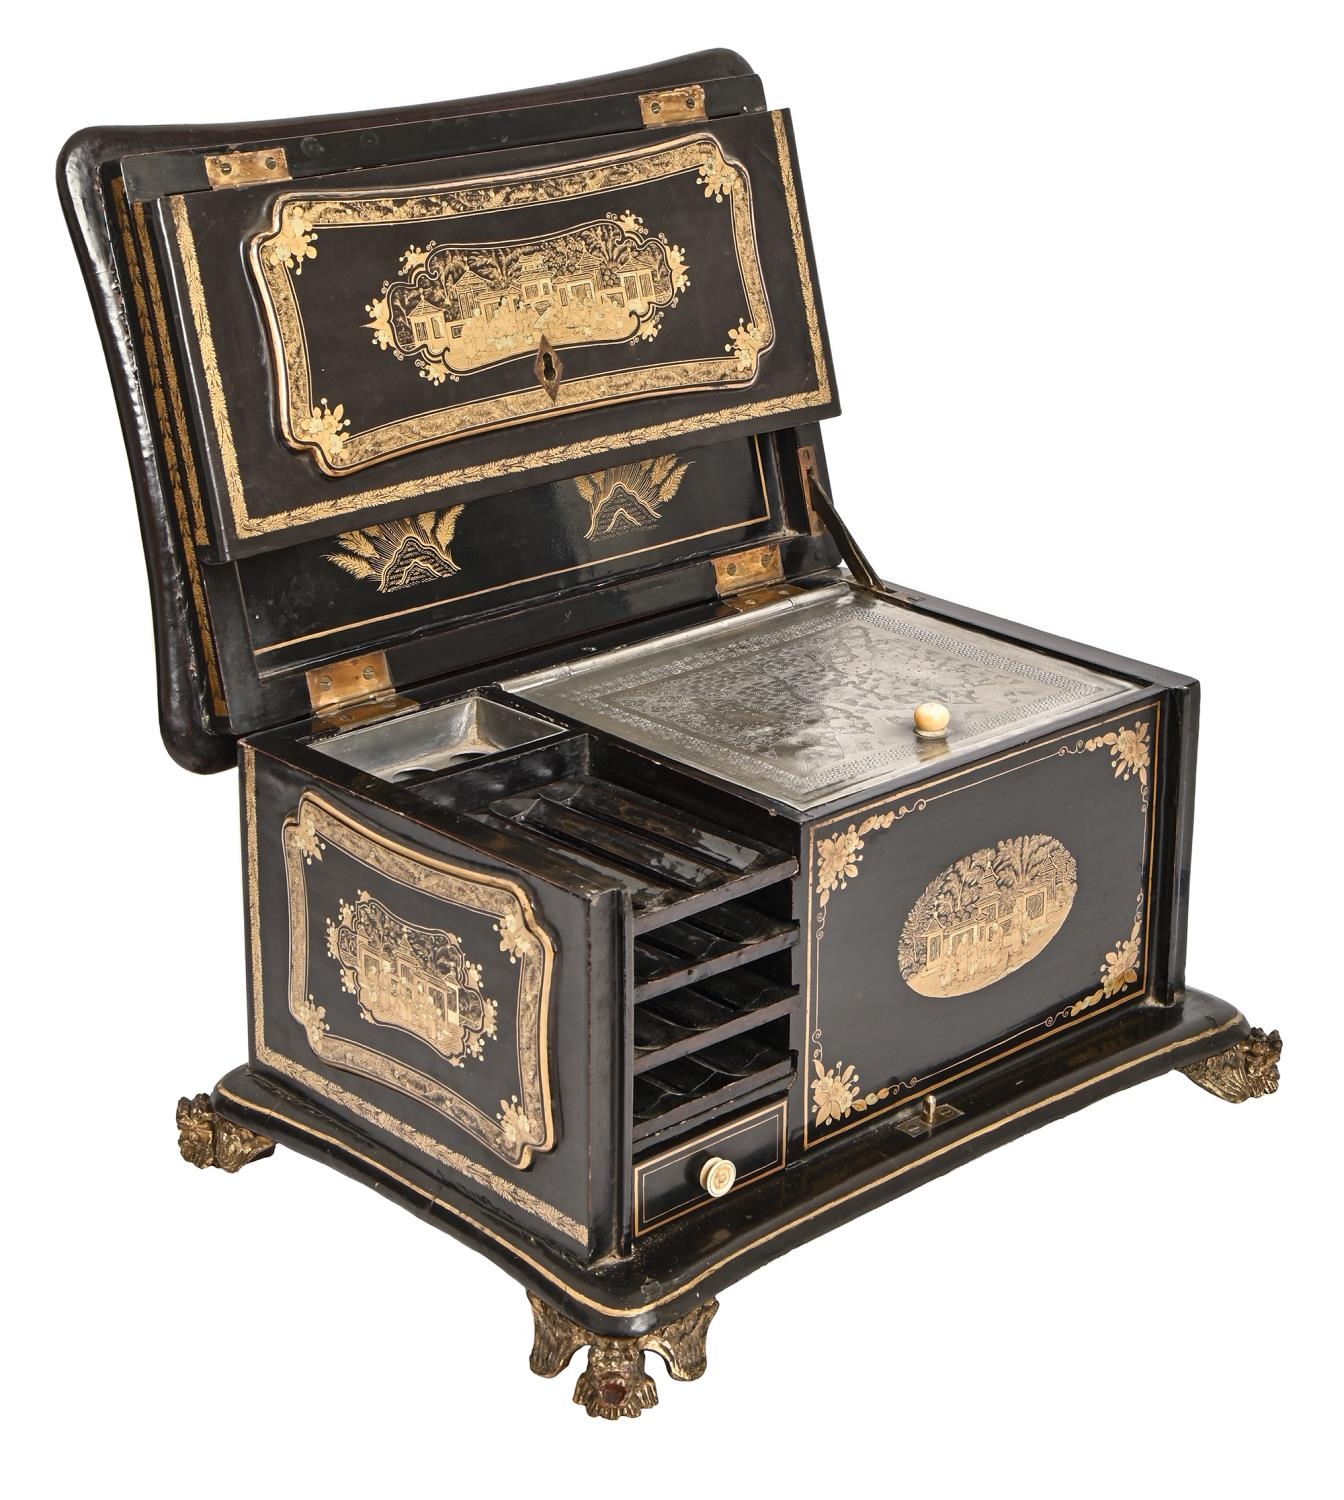 A Chinese export black and gold lacquer table cabinet, 19th c, with fitted interior, containing - Image 2 of 2